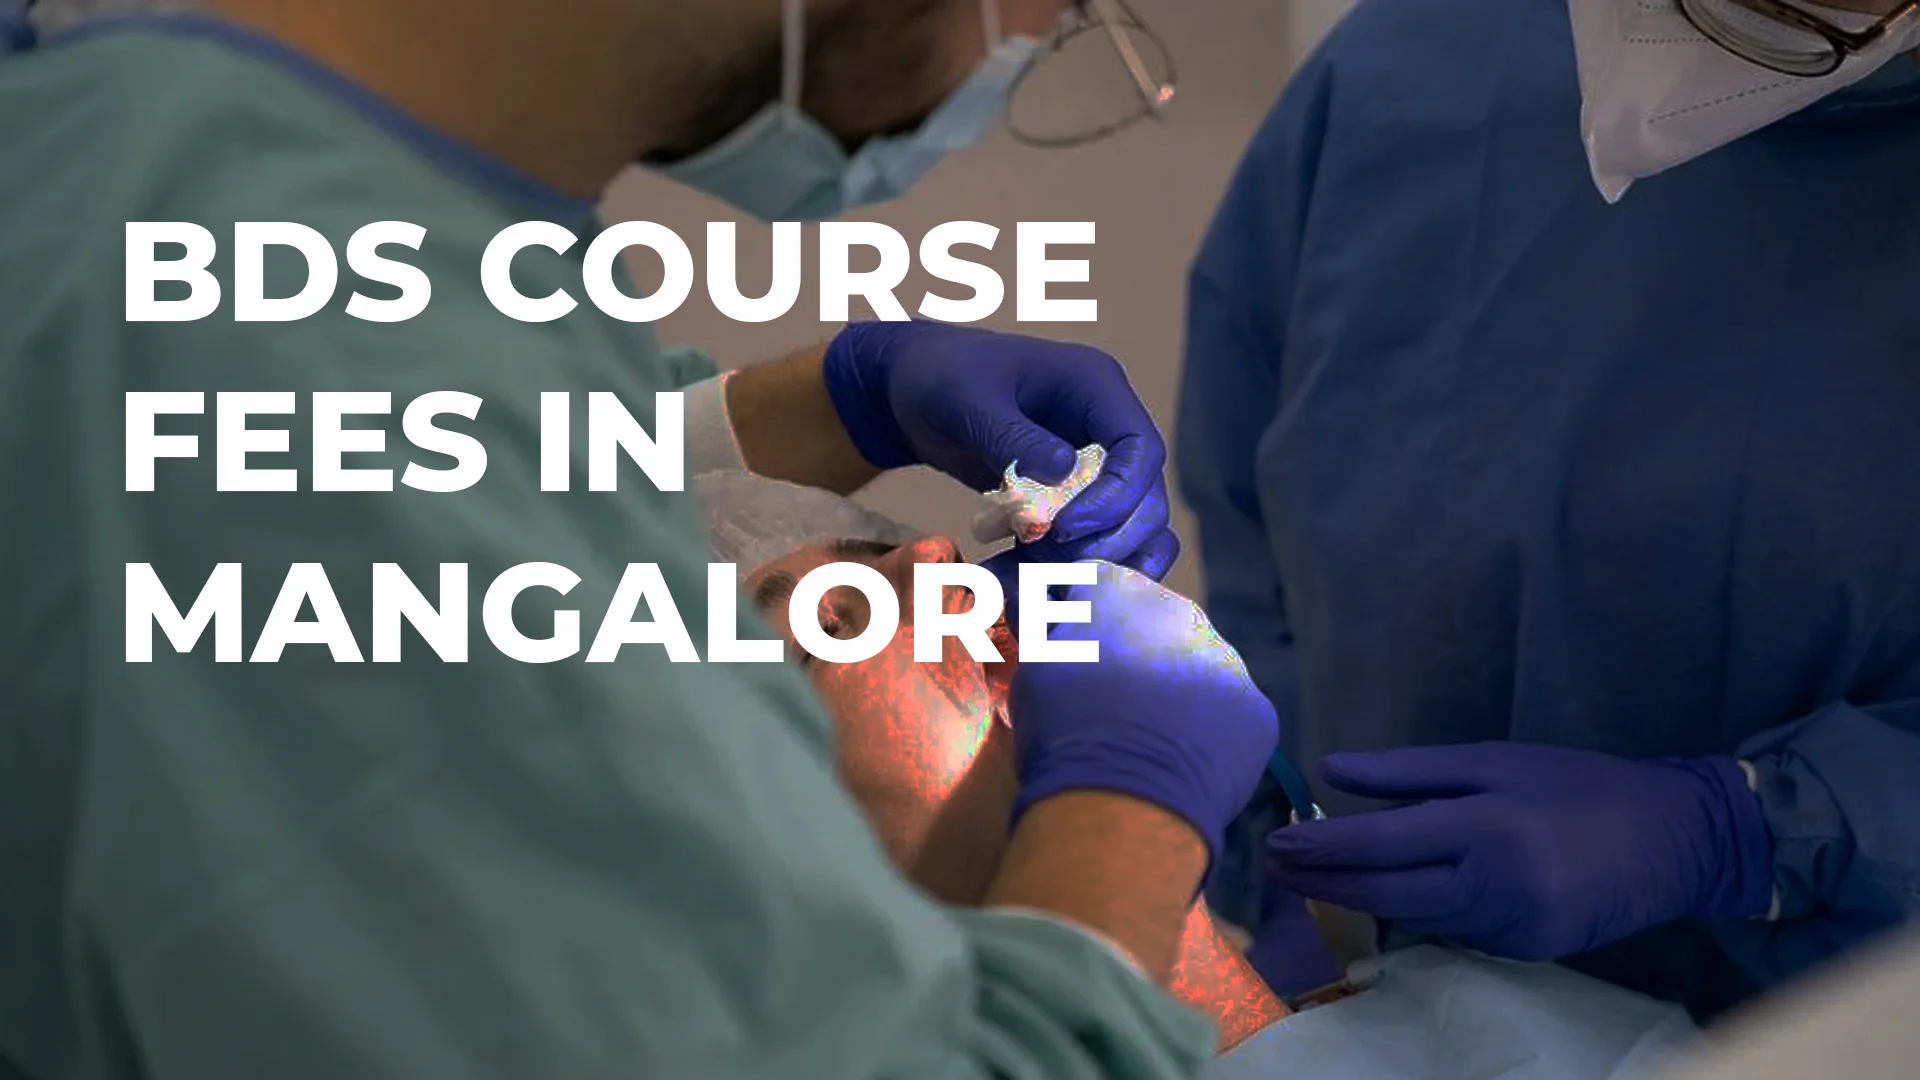 BDS Course fees in Mangalore dental colleges